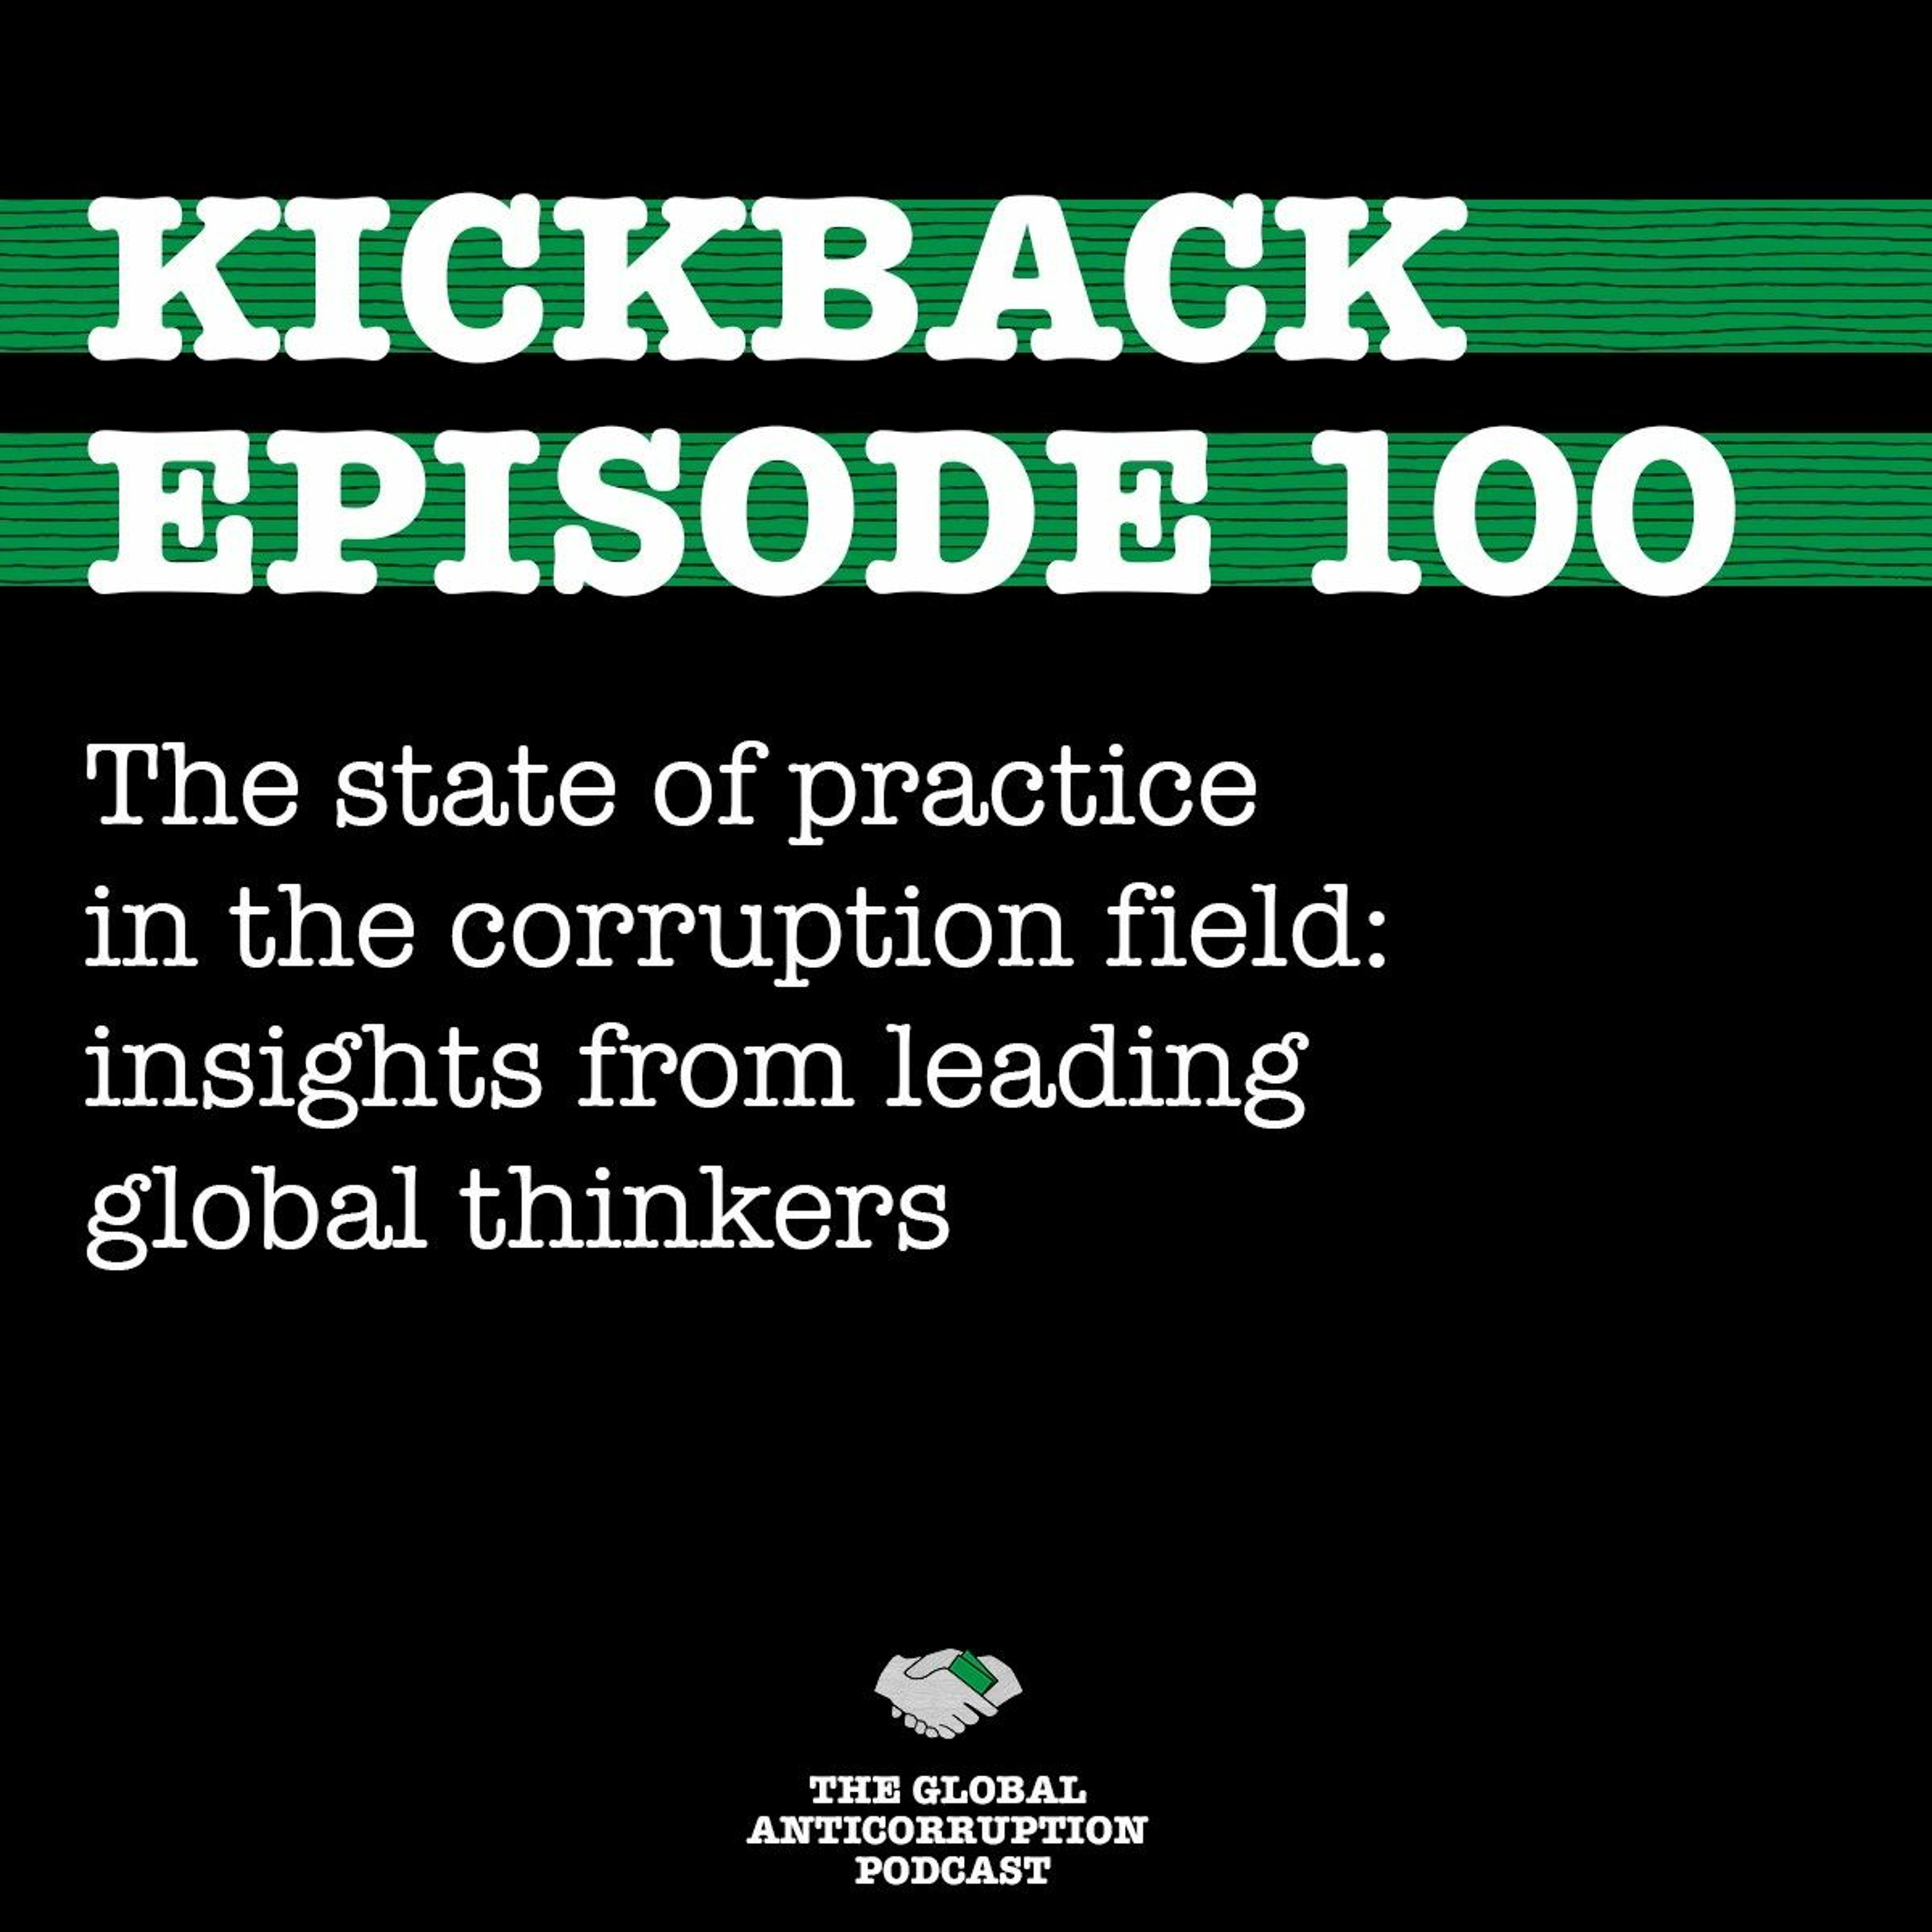 100. The state of practice in the corruption field: insights from leading global thinkers